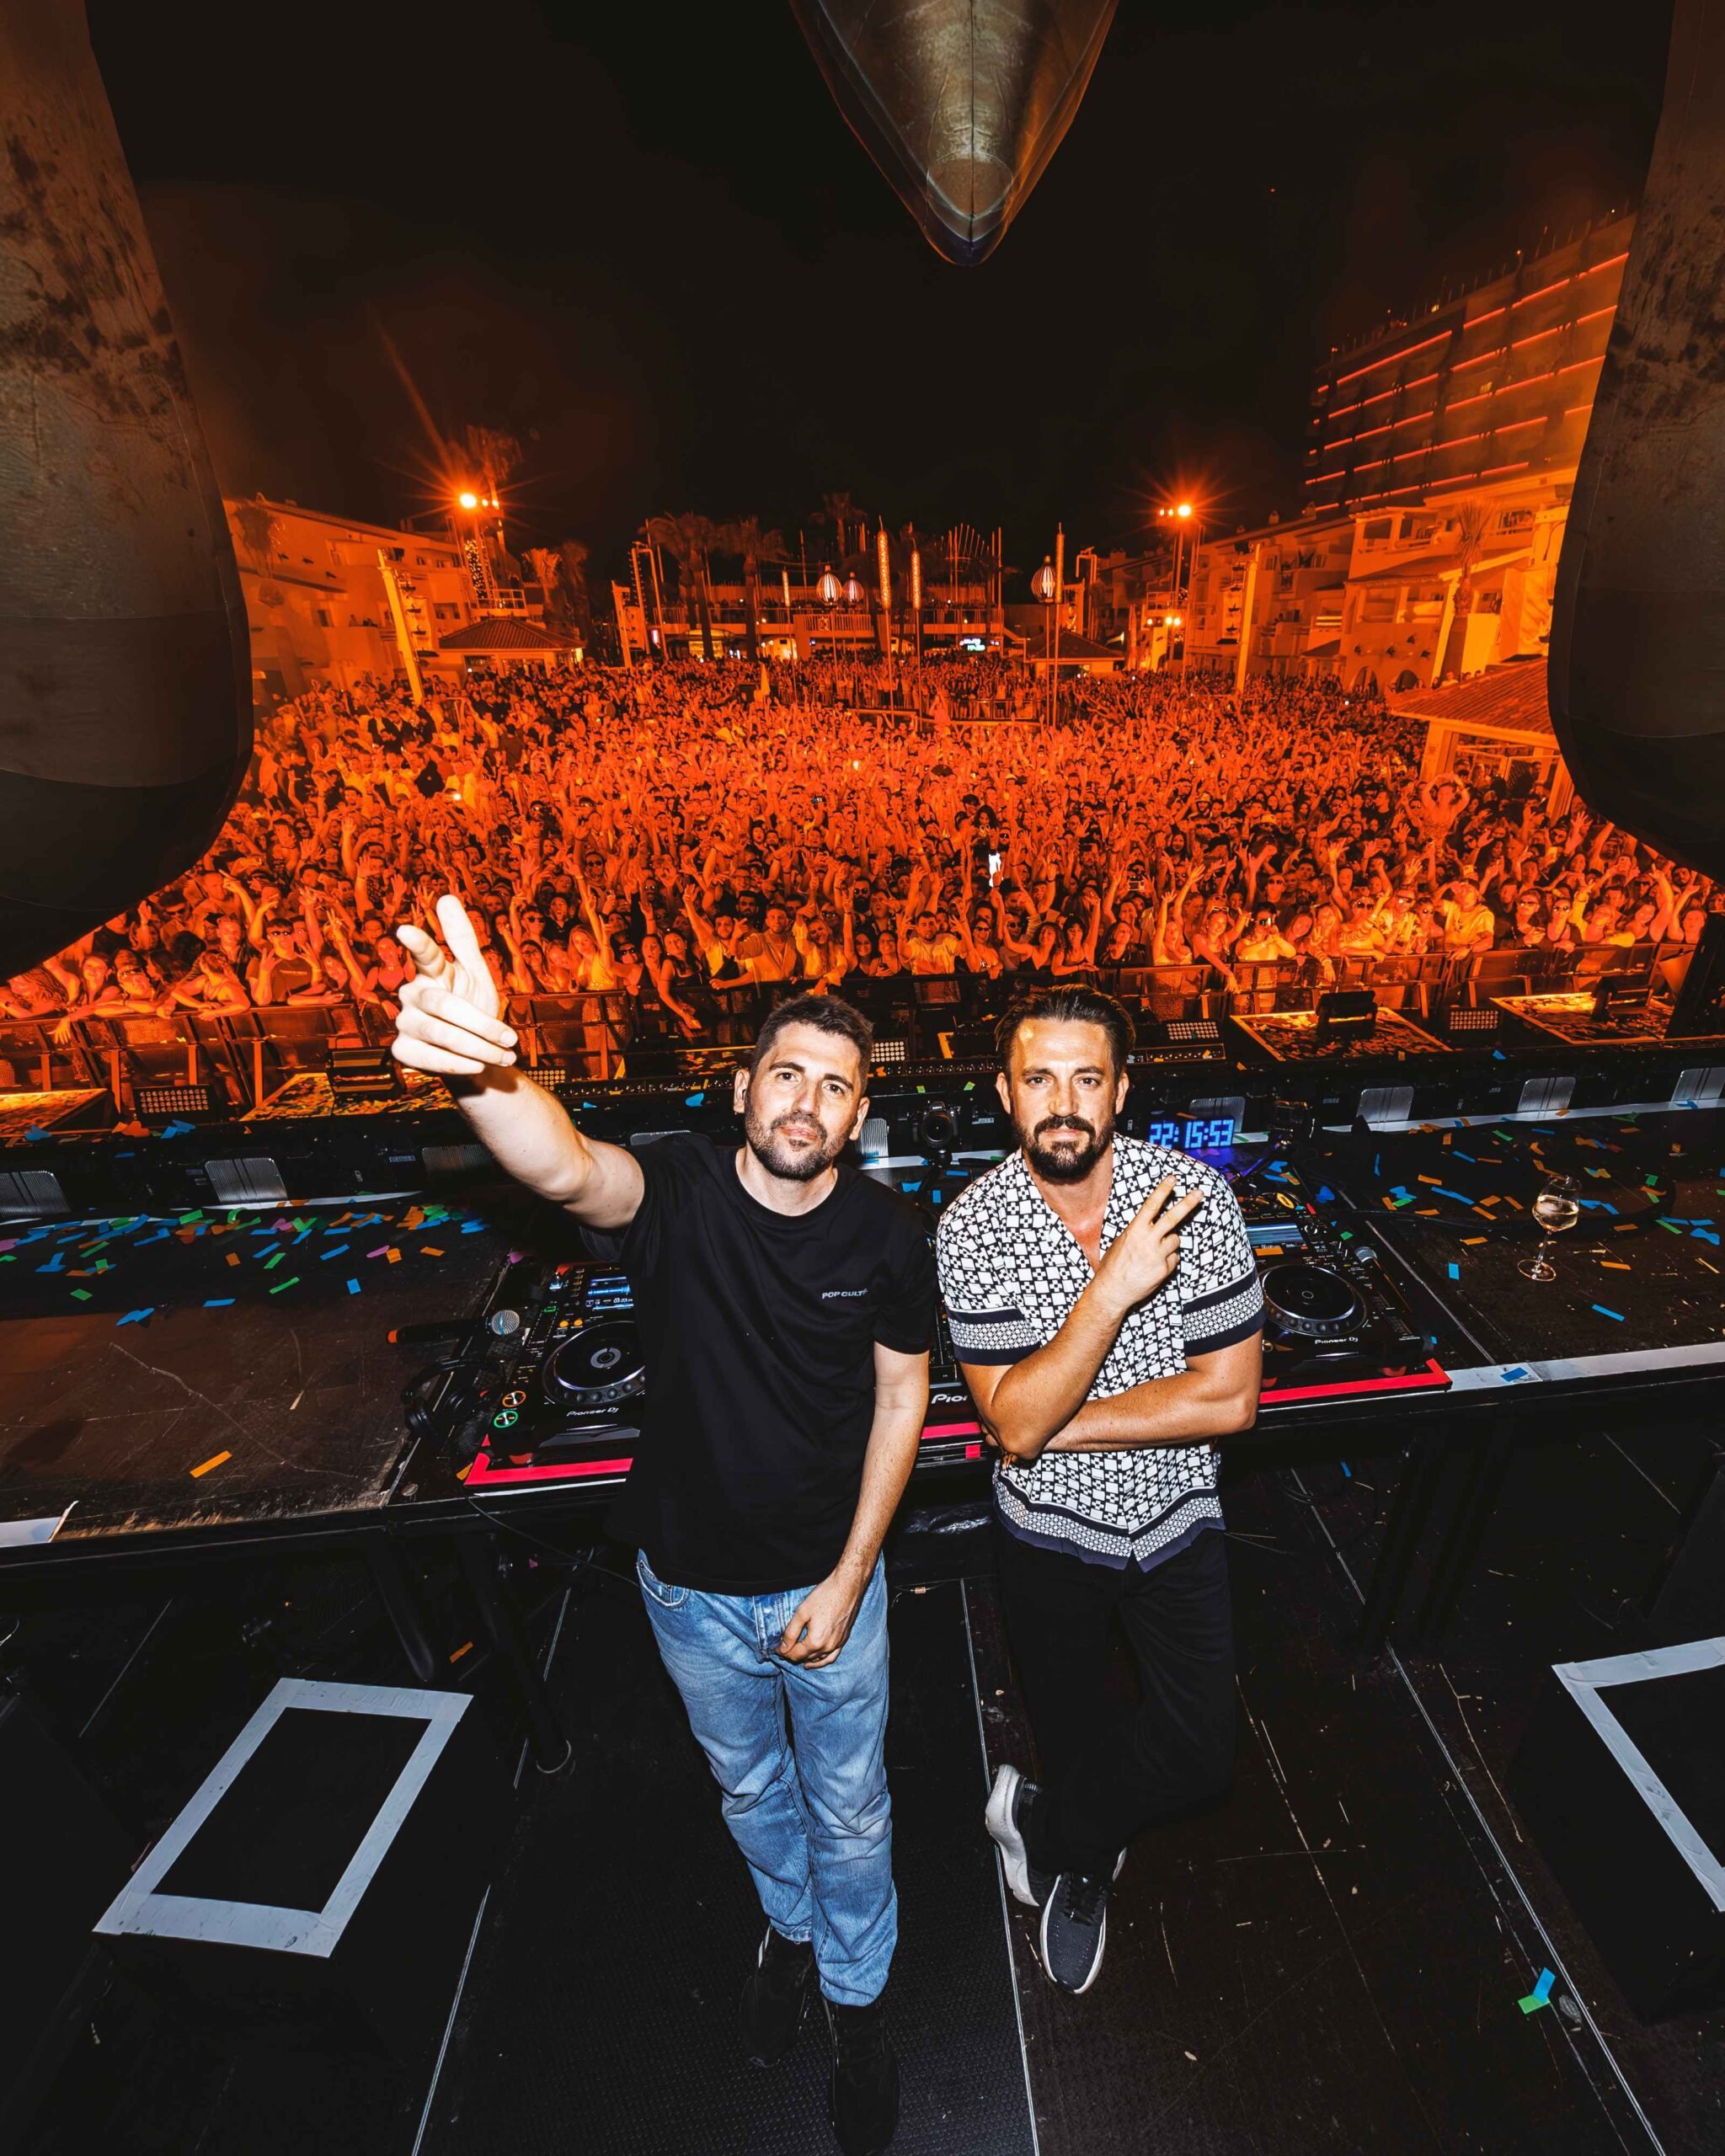 Tomorrowland, Dimitri Vegas & Like Mike, and Ushuaïa Ibiza launched their 18-week residency with a spectacular, sold-out opening party